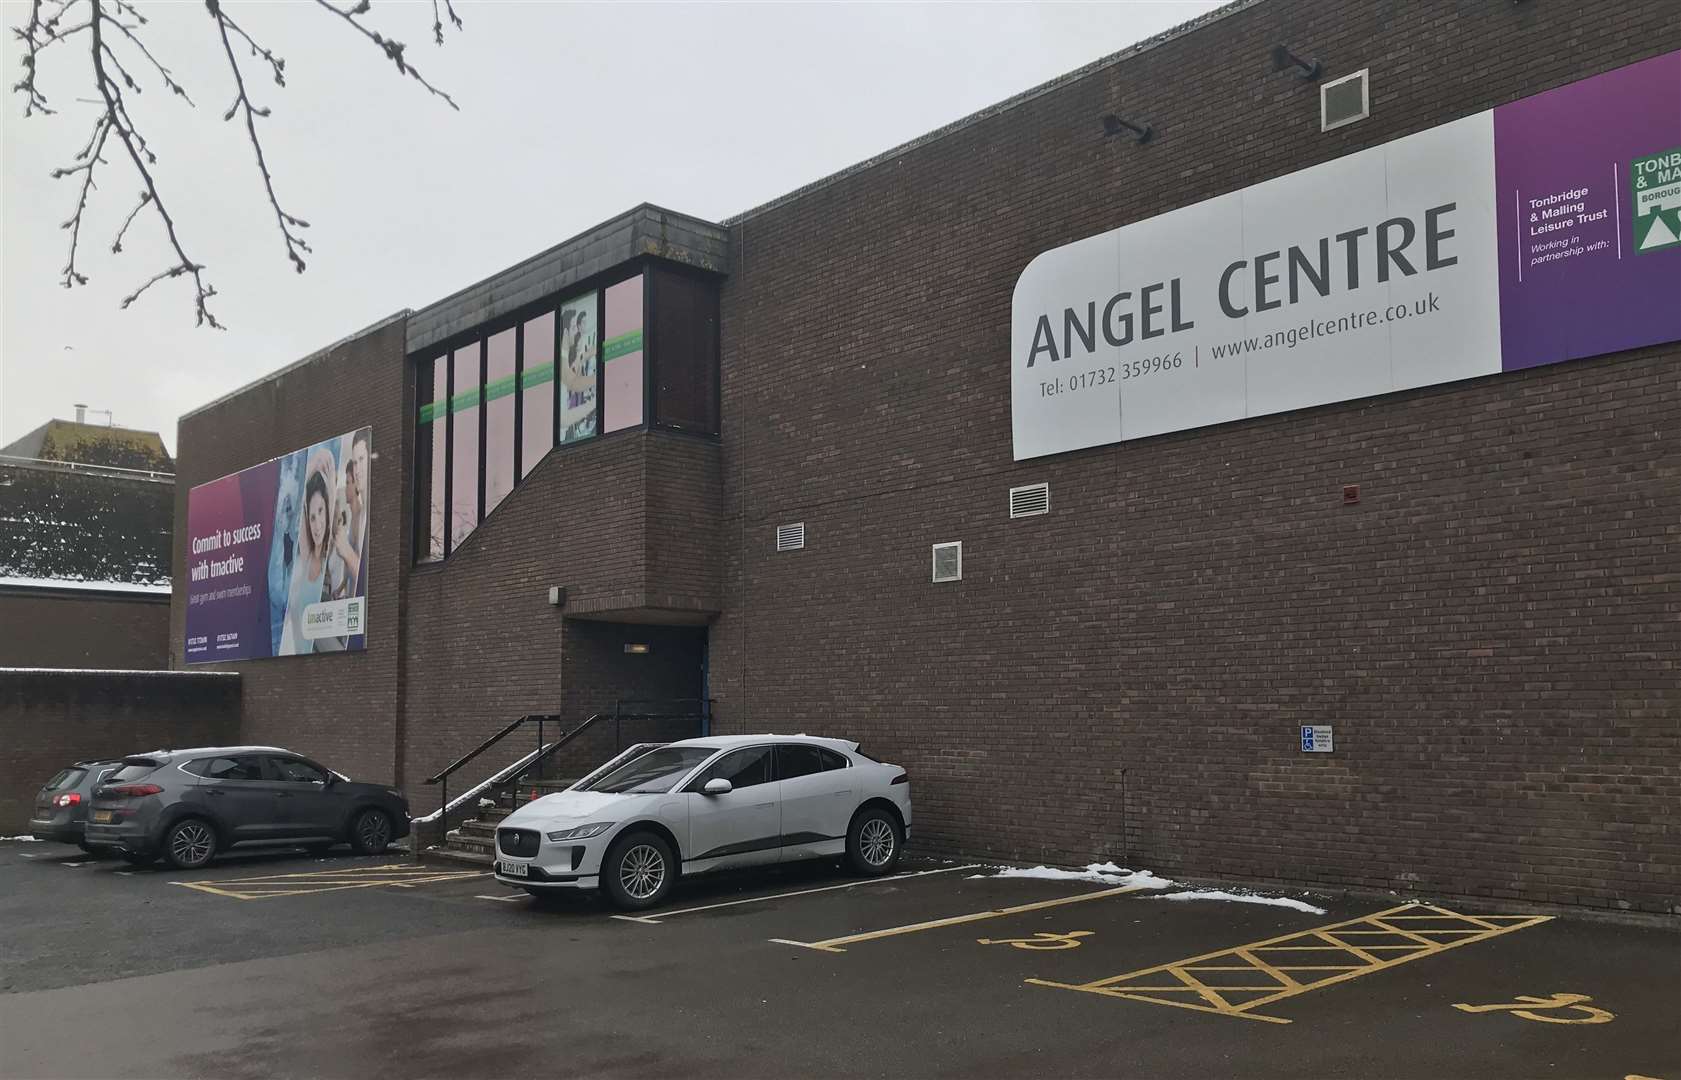 The Angel Centre in Tonbridge has been turned into a vaccination hub